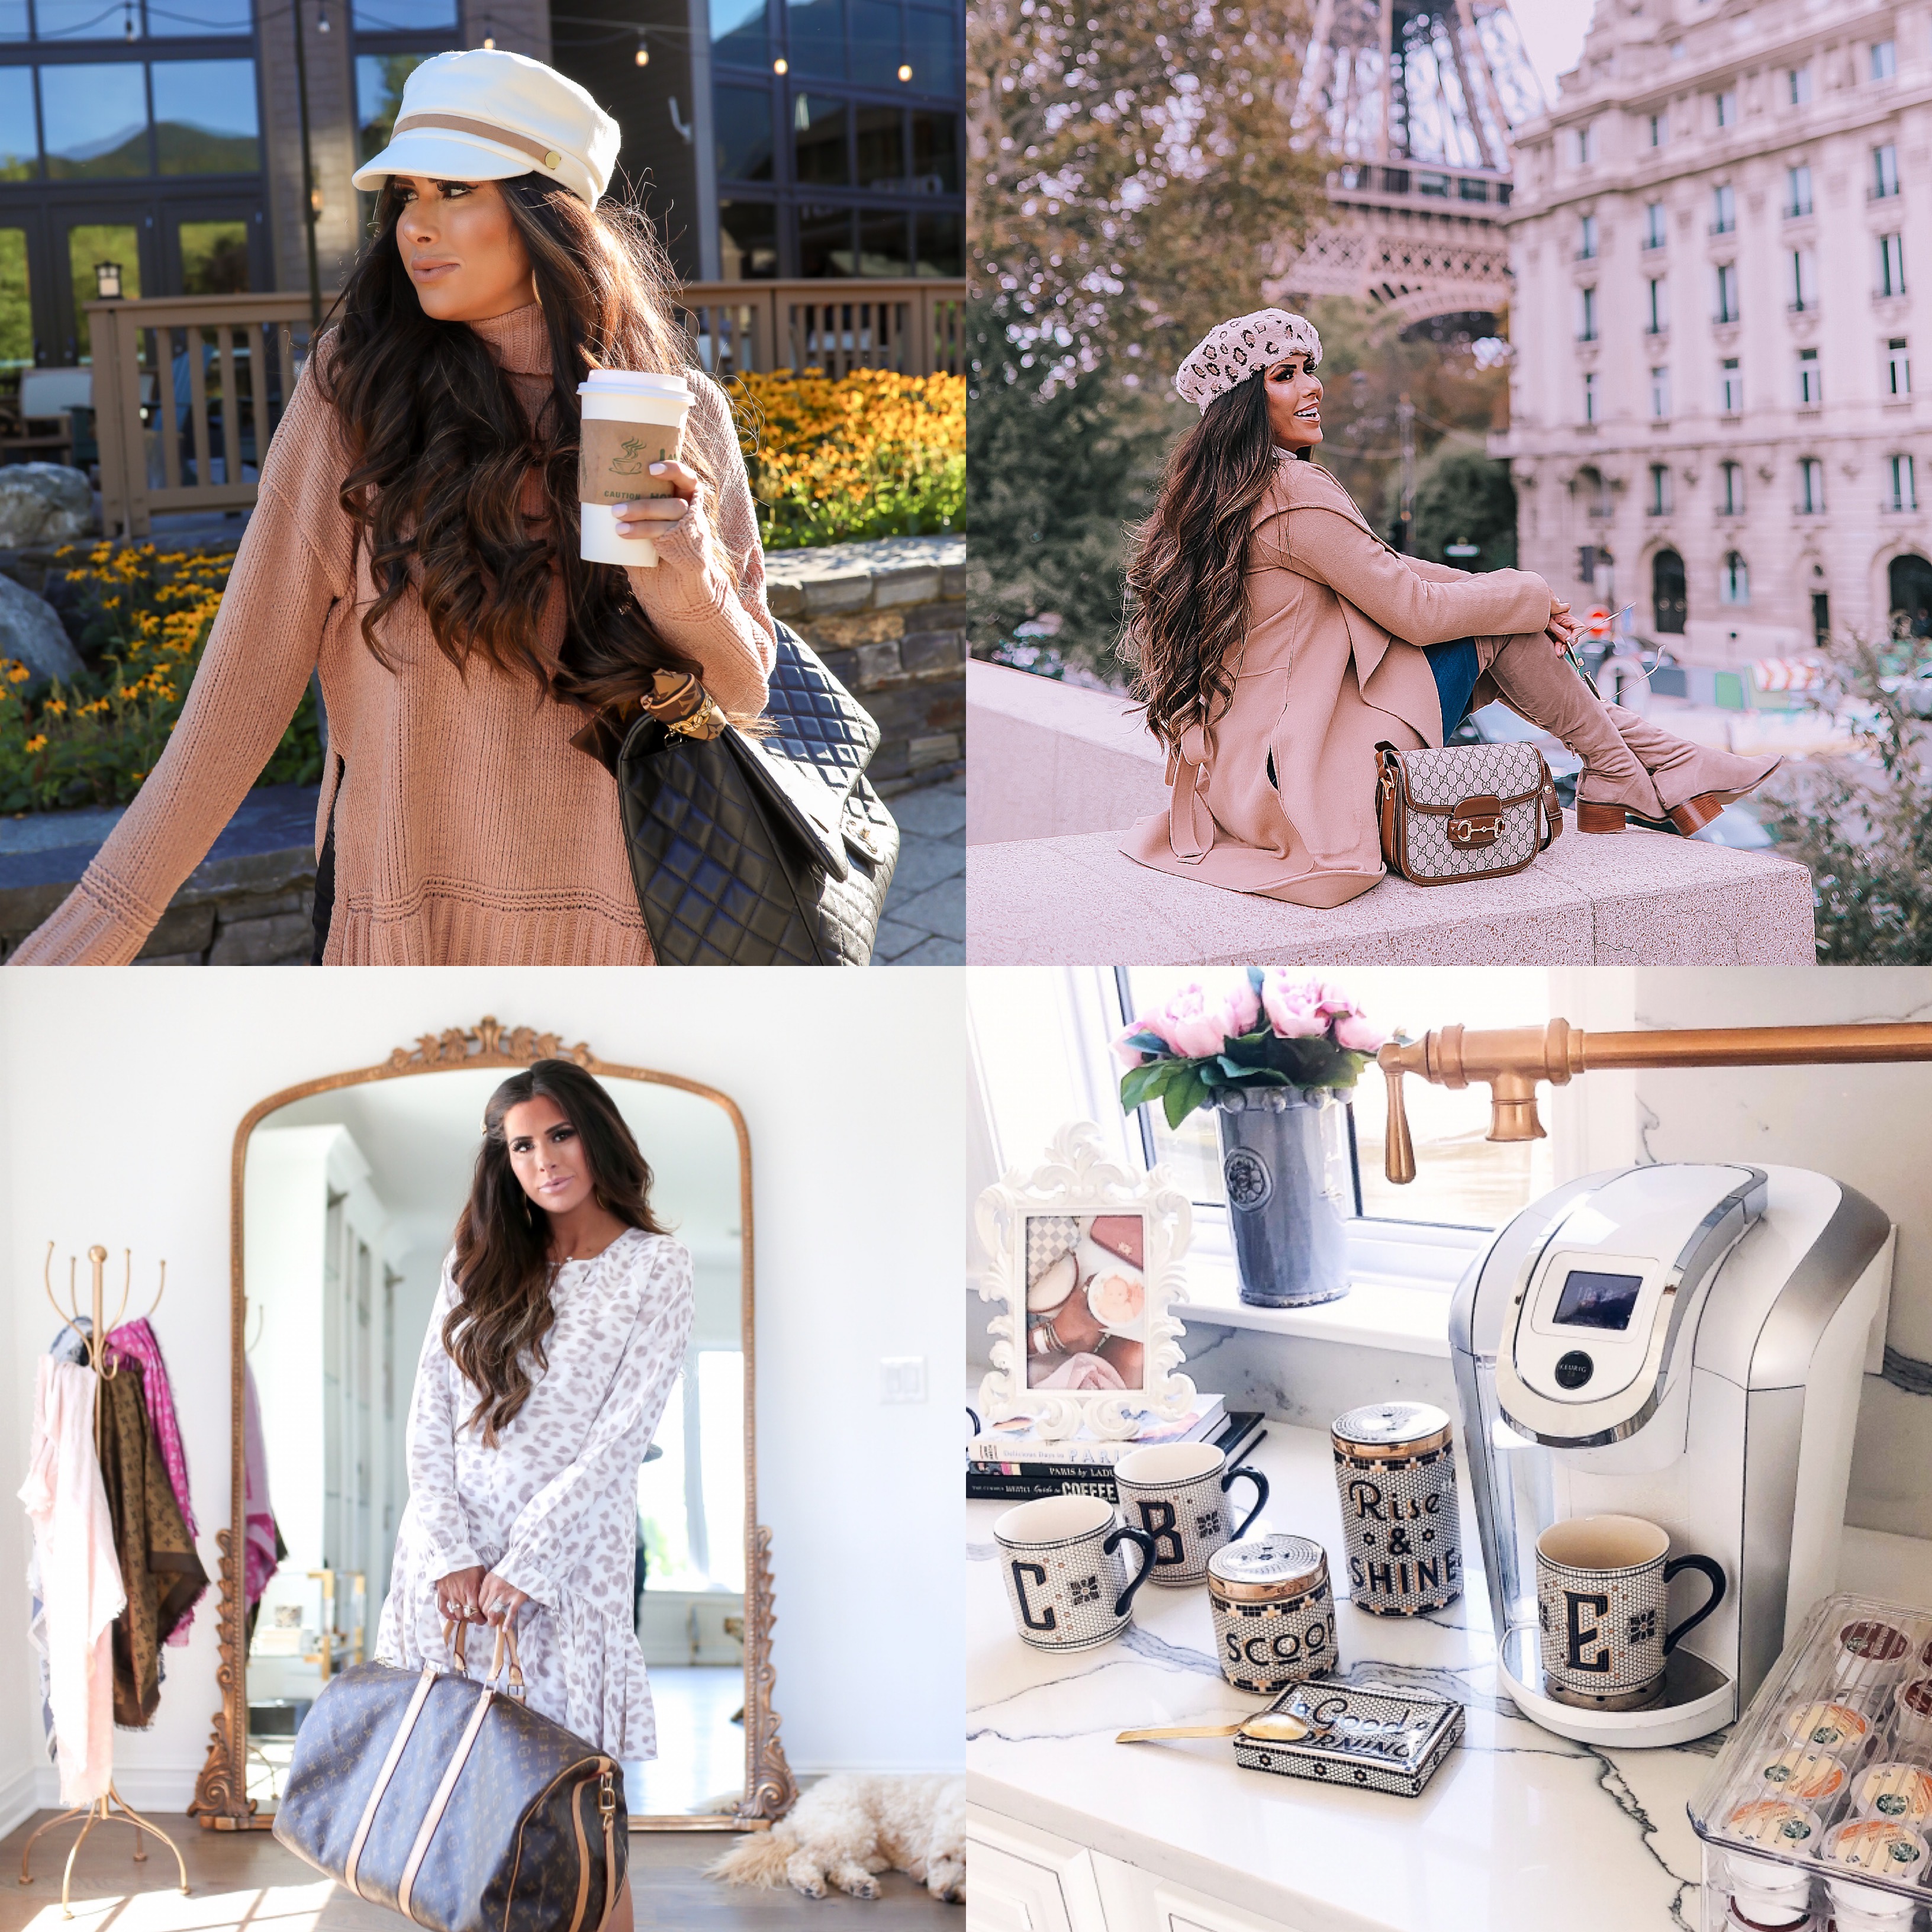 top best black friday sales, anthropologie black friday sale, aerie black friday sale | Mega Black Friday Sales and Deals Guide!! by popular Oklahoma life and style blog, The Sweetest Thing: collage image of a woman wearing various Black Friday sale items.